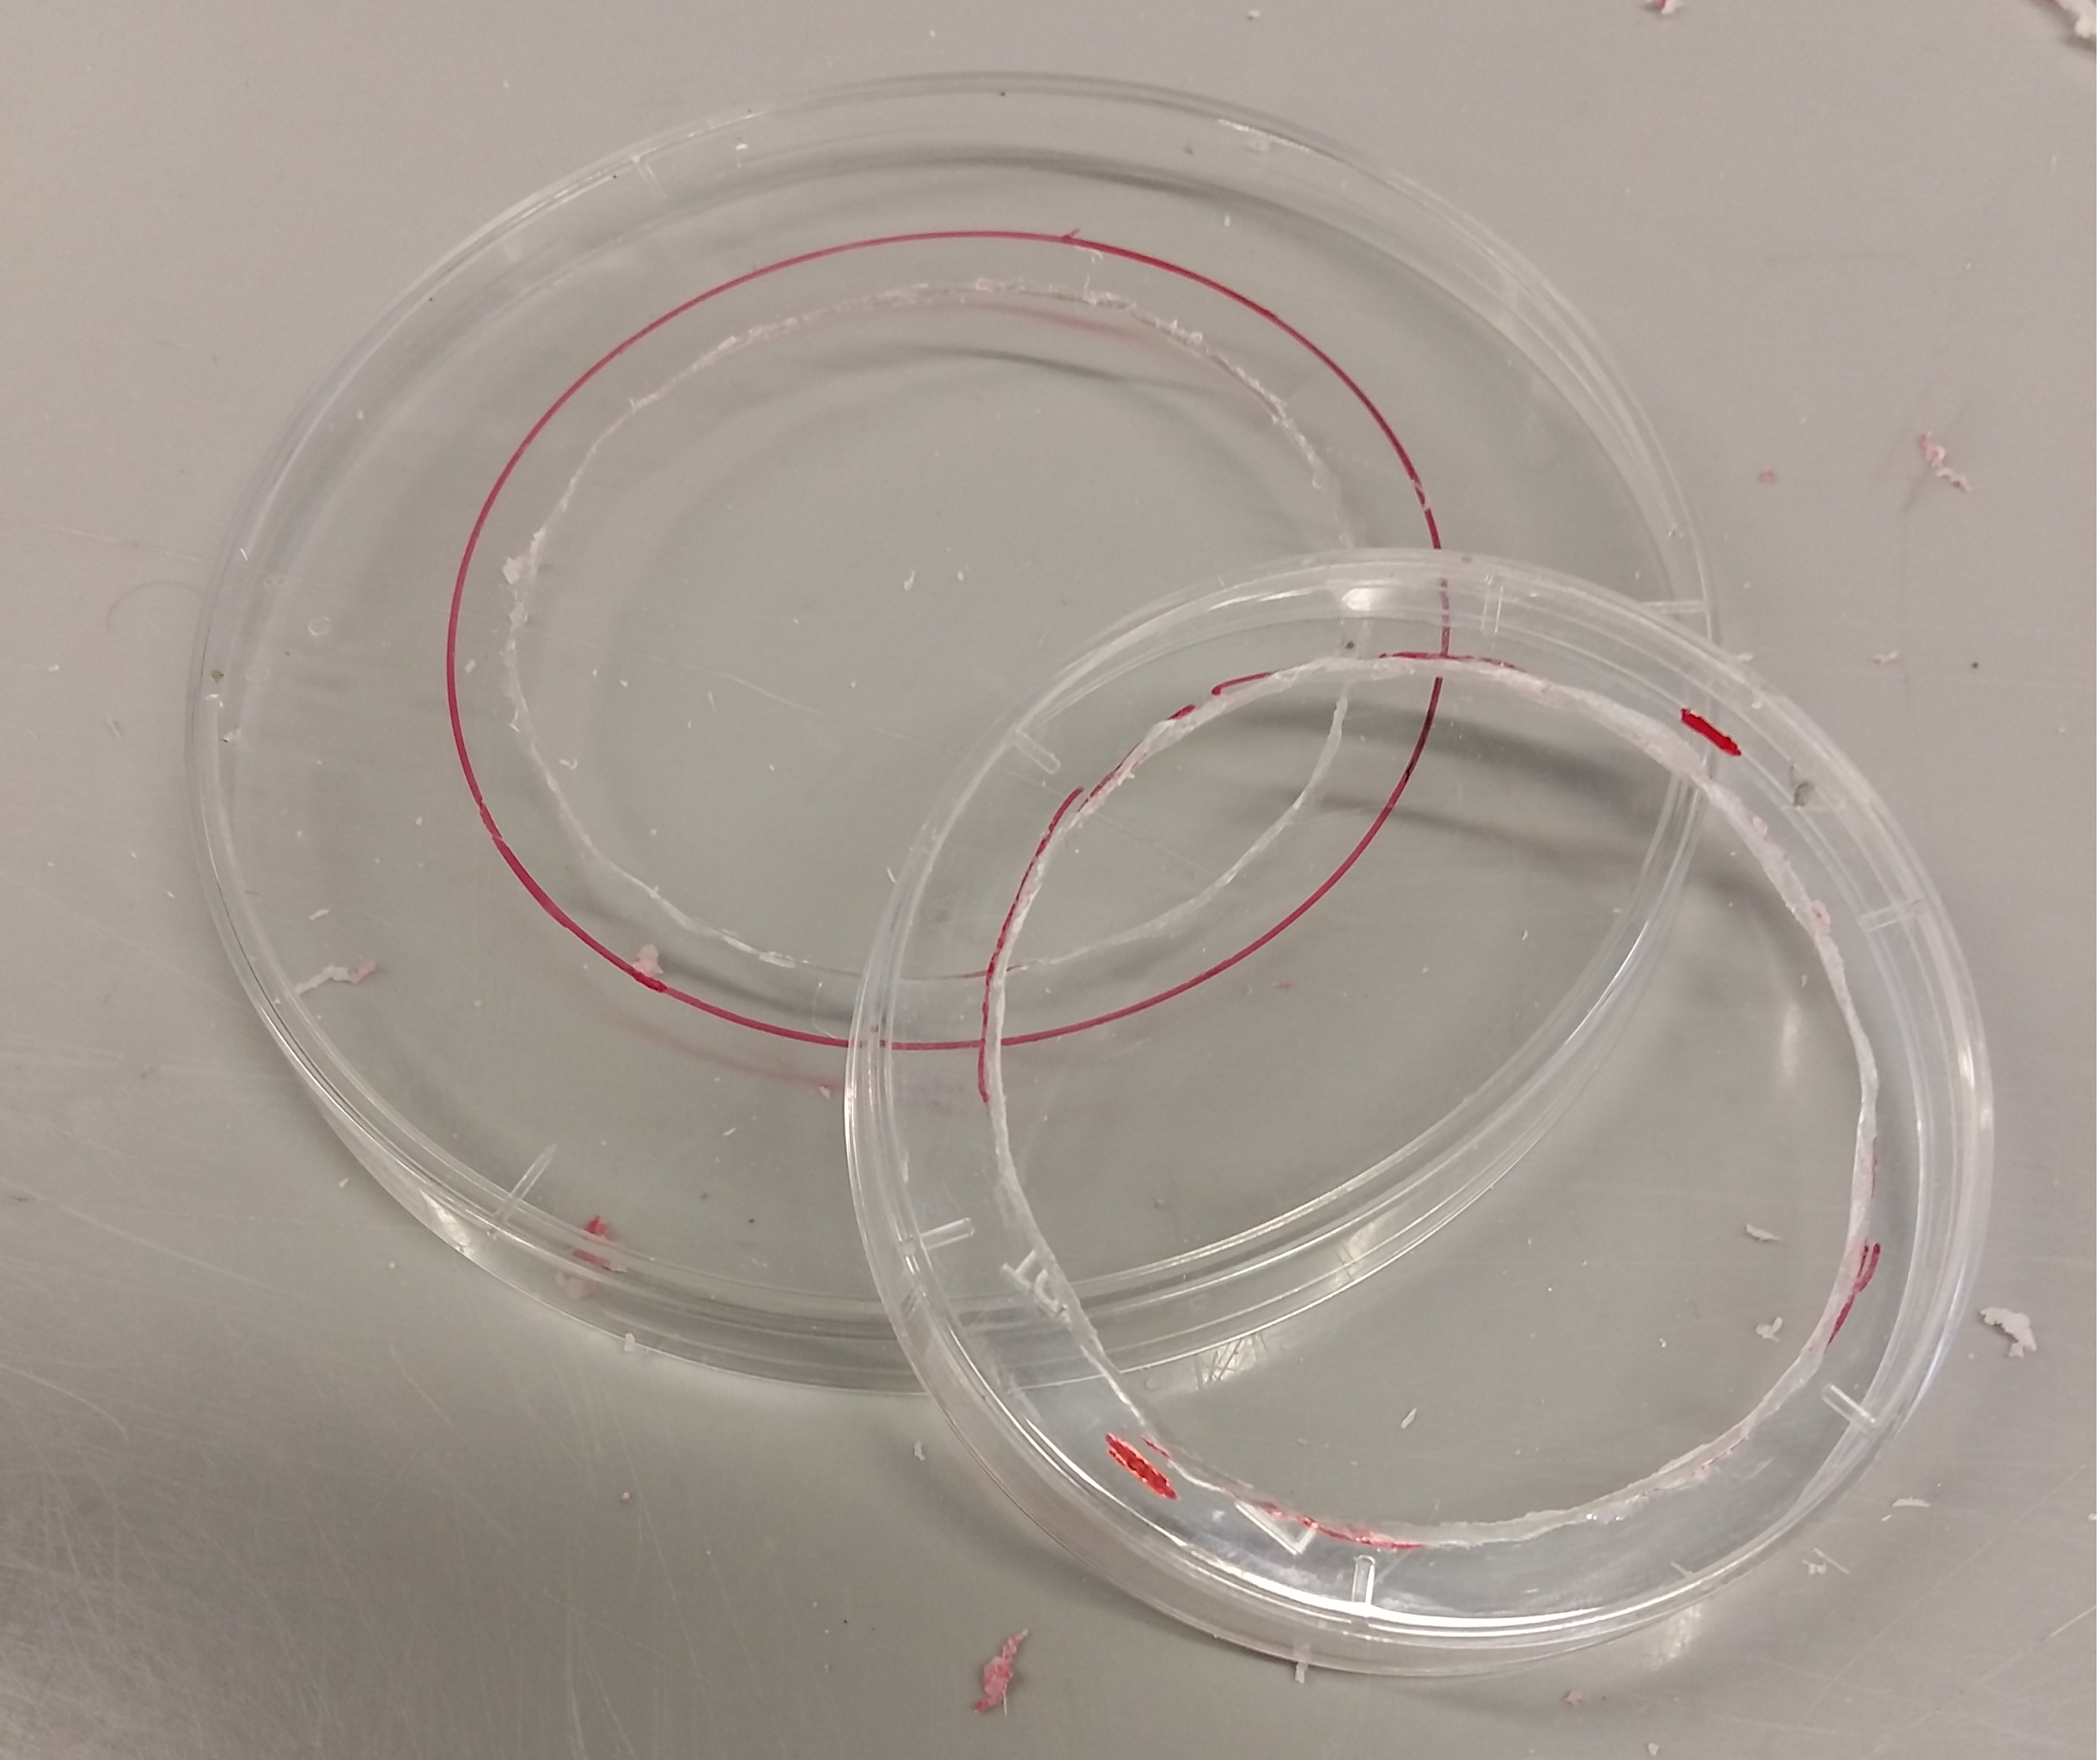 Openings in both petri dishes.